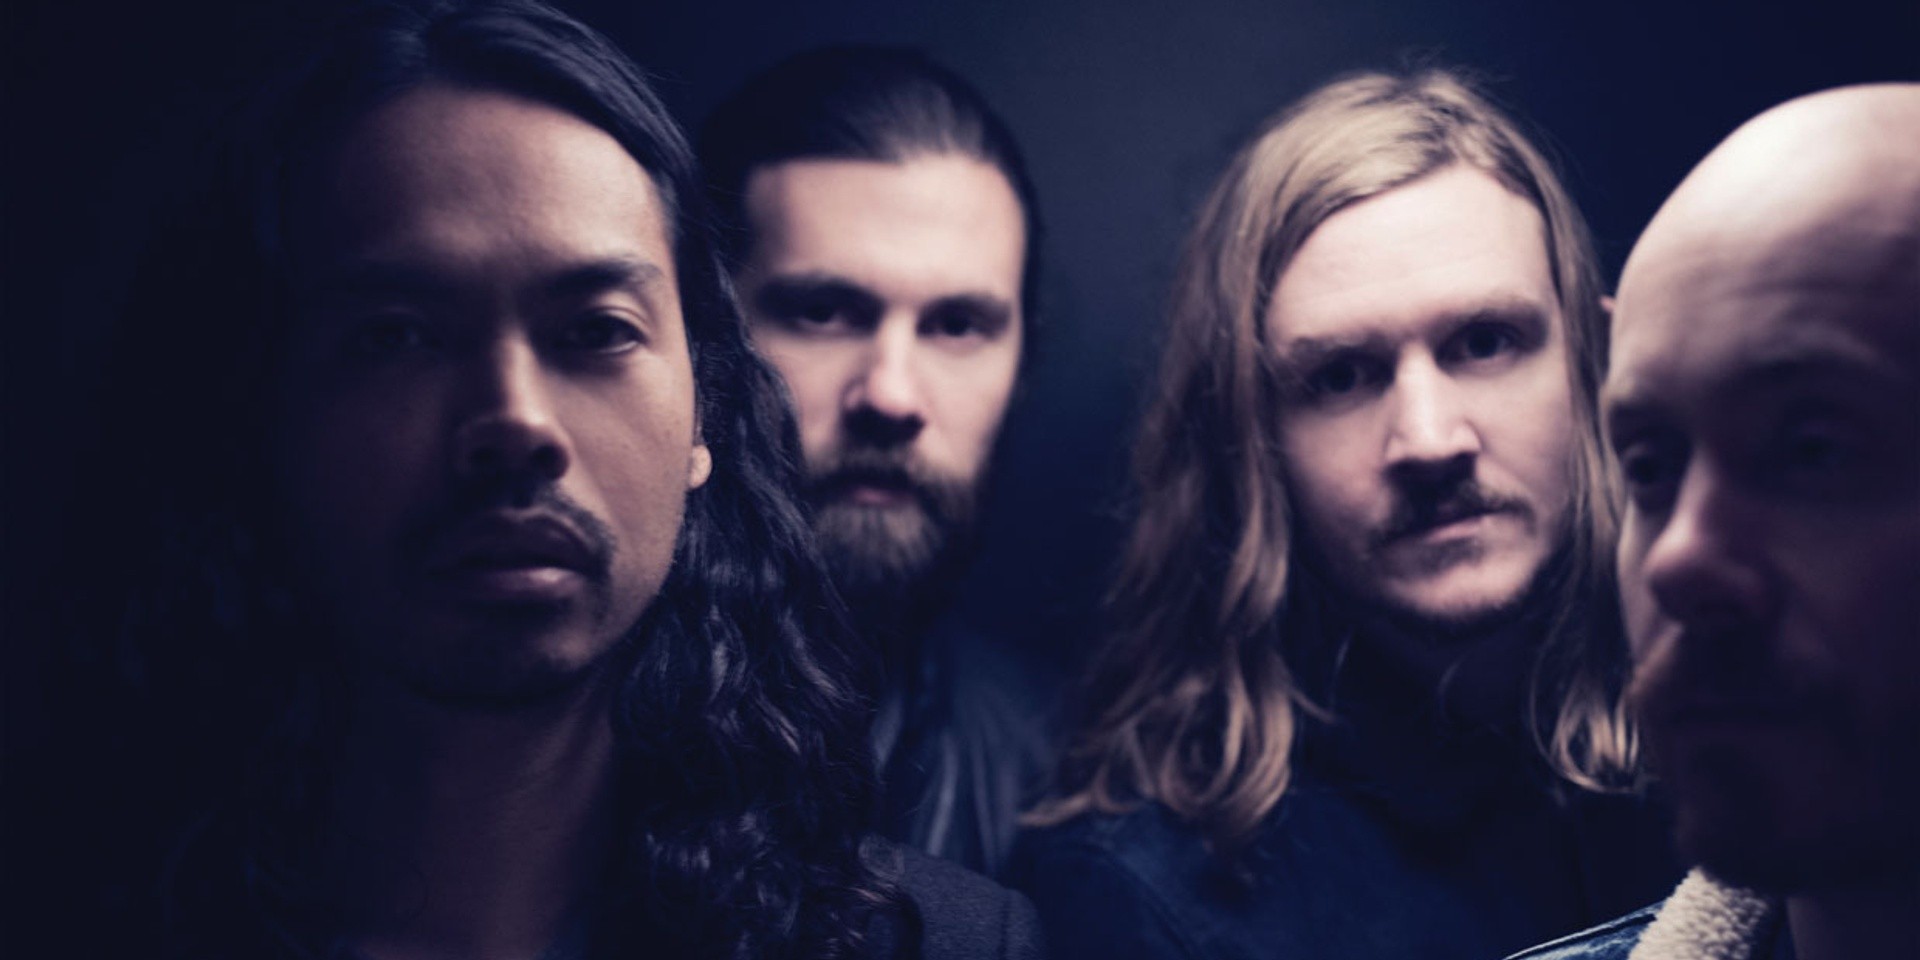 WATCH: The Temper Trap talk about their spirited return in 2016, perform 'Fall Together'